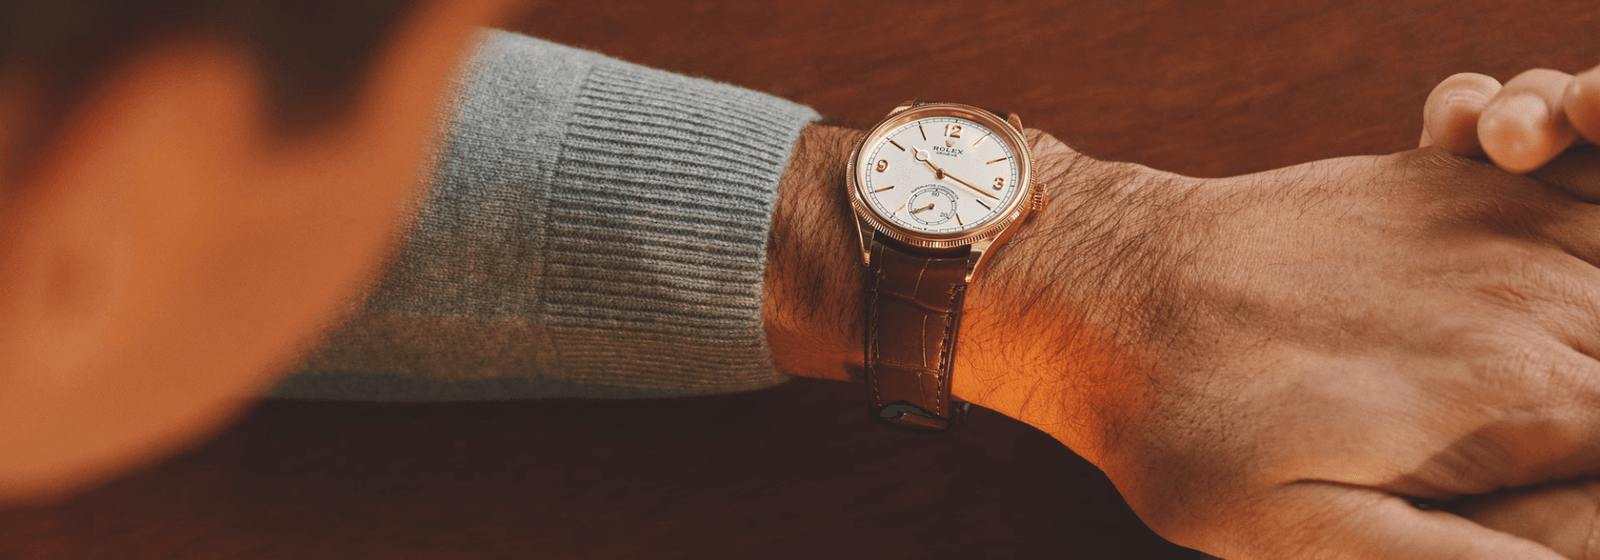 A Guide To Luxury Watches: For Grooms